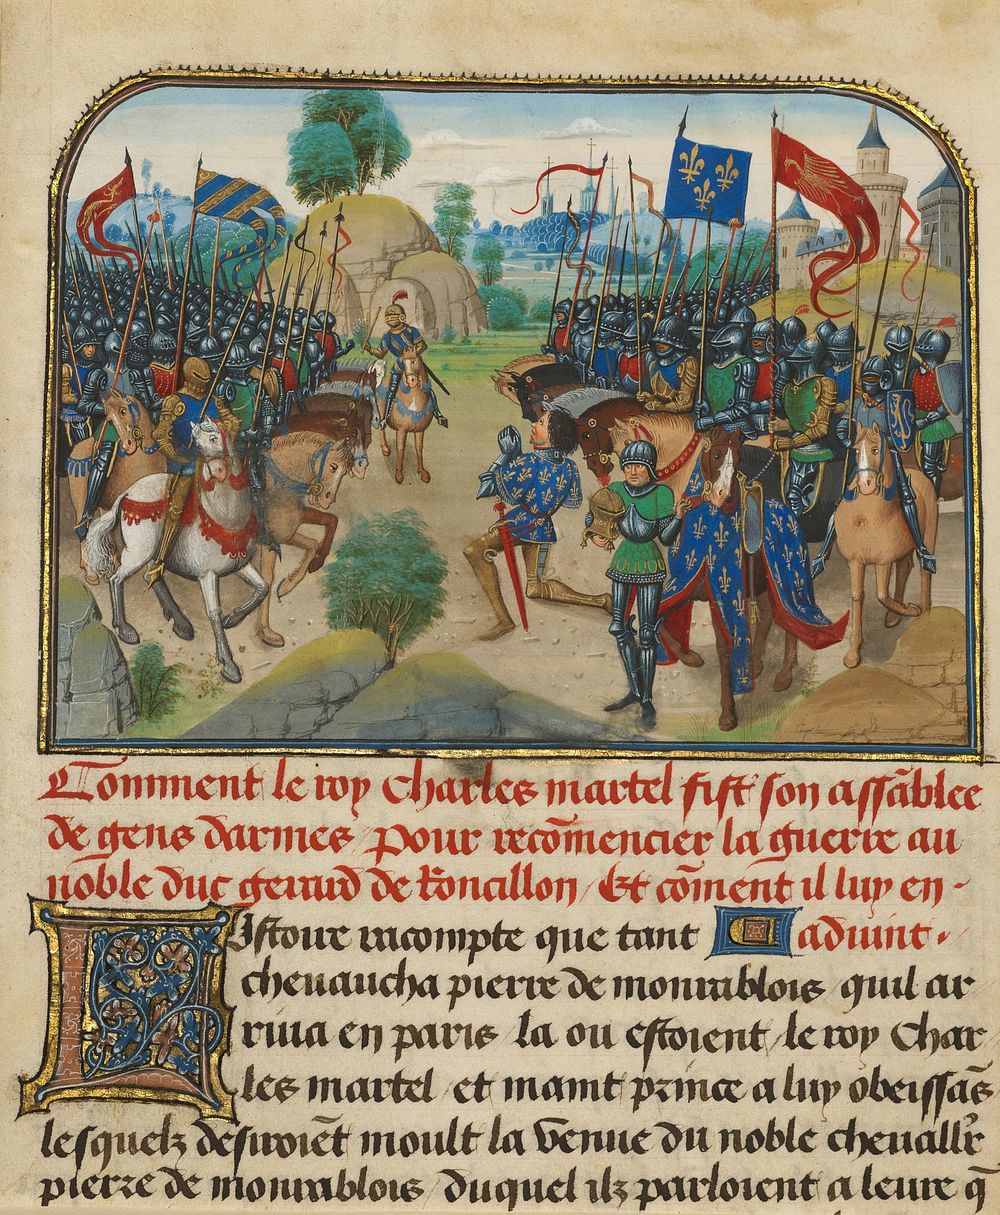 The Armies of France and Burgundy with Martel in Prayer by Loyset Liédet and Pol Fruit